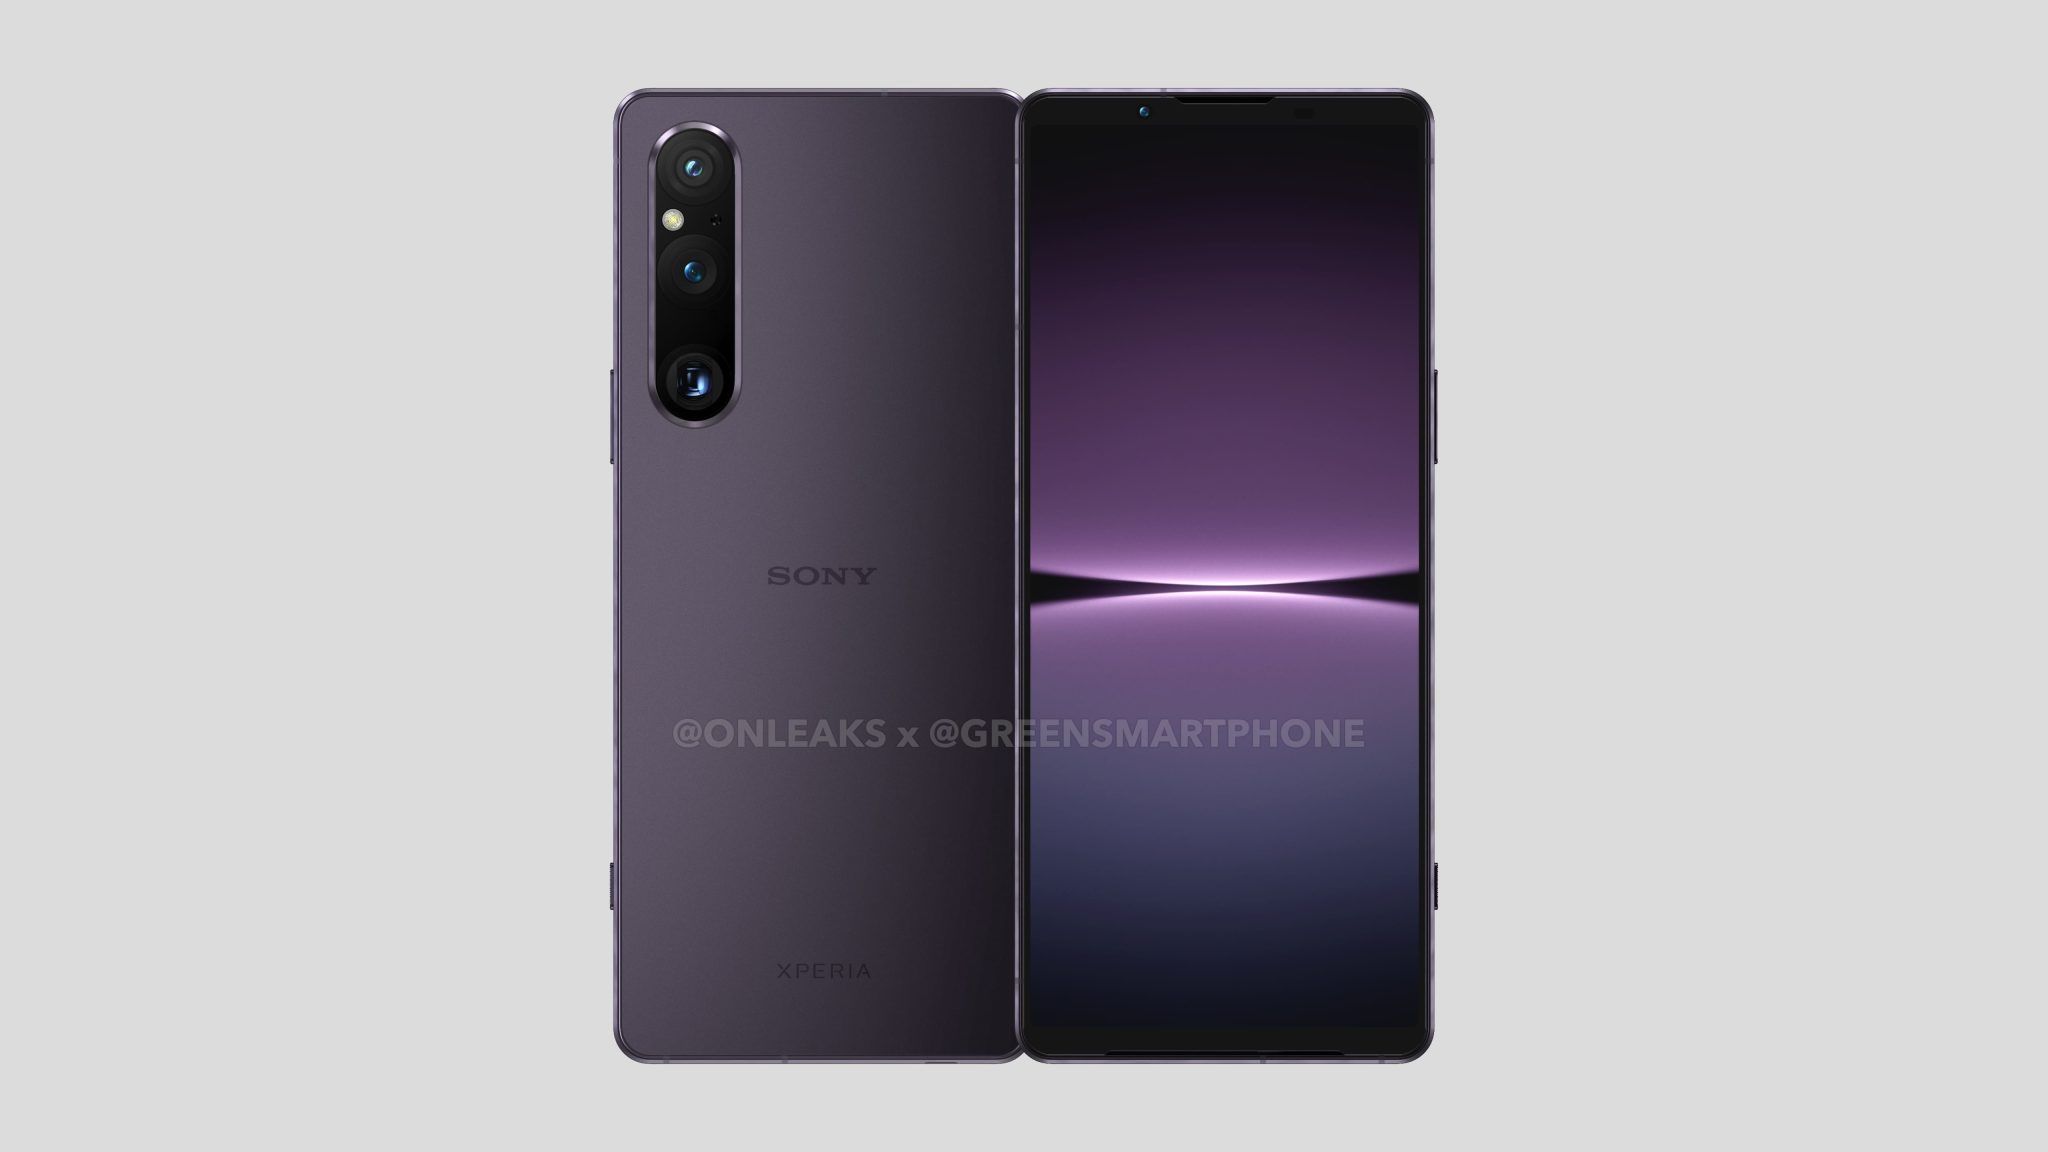 Sony Xperia 5 V leaked promo video reveals a major change